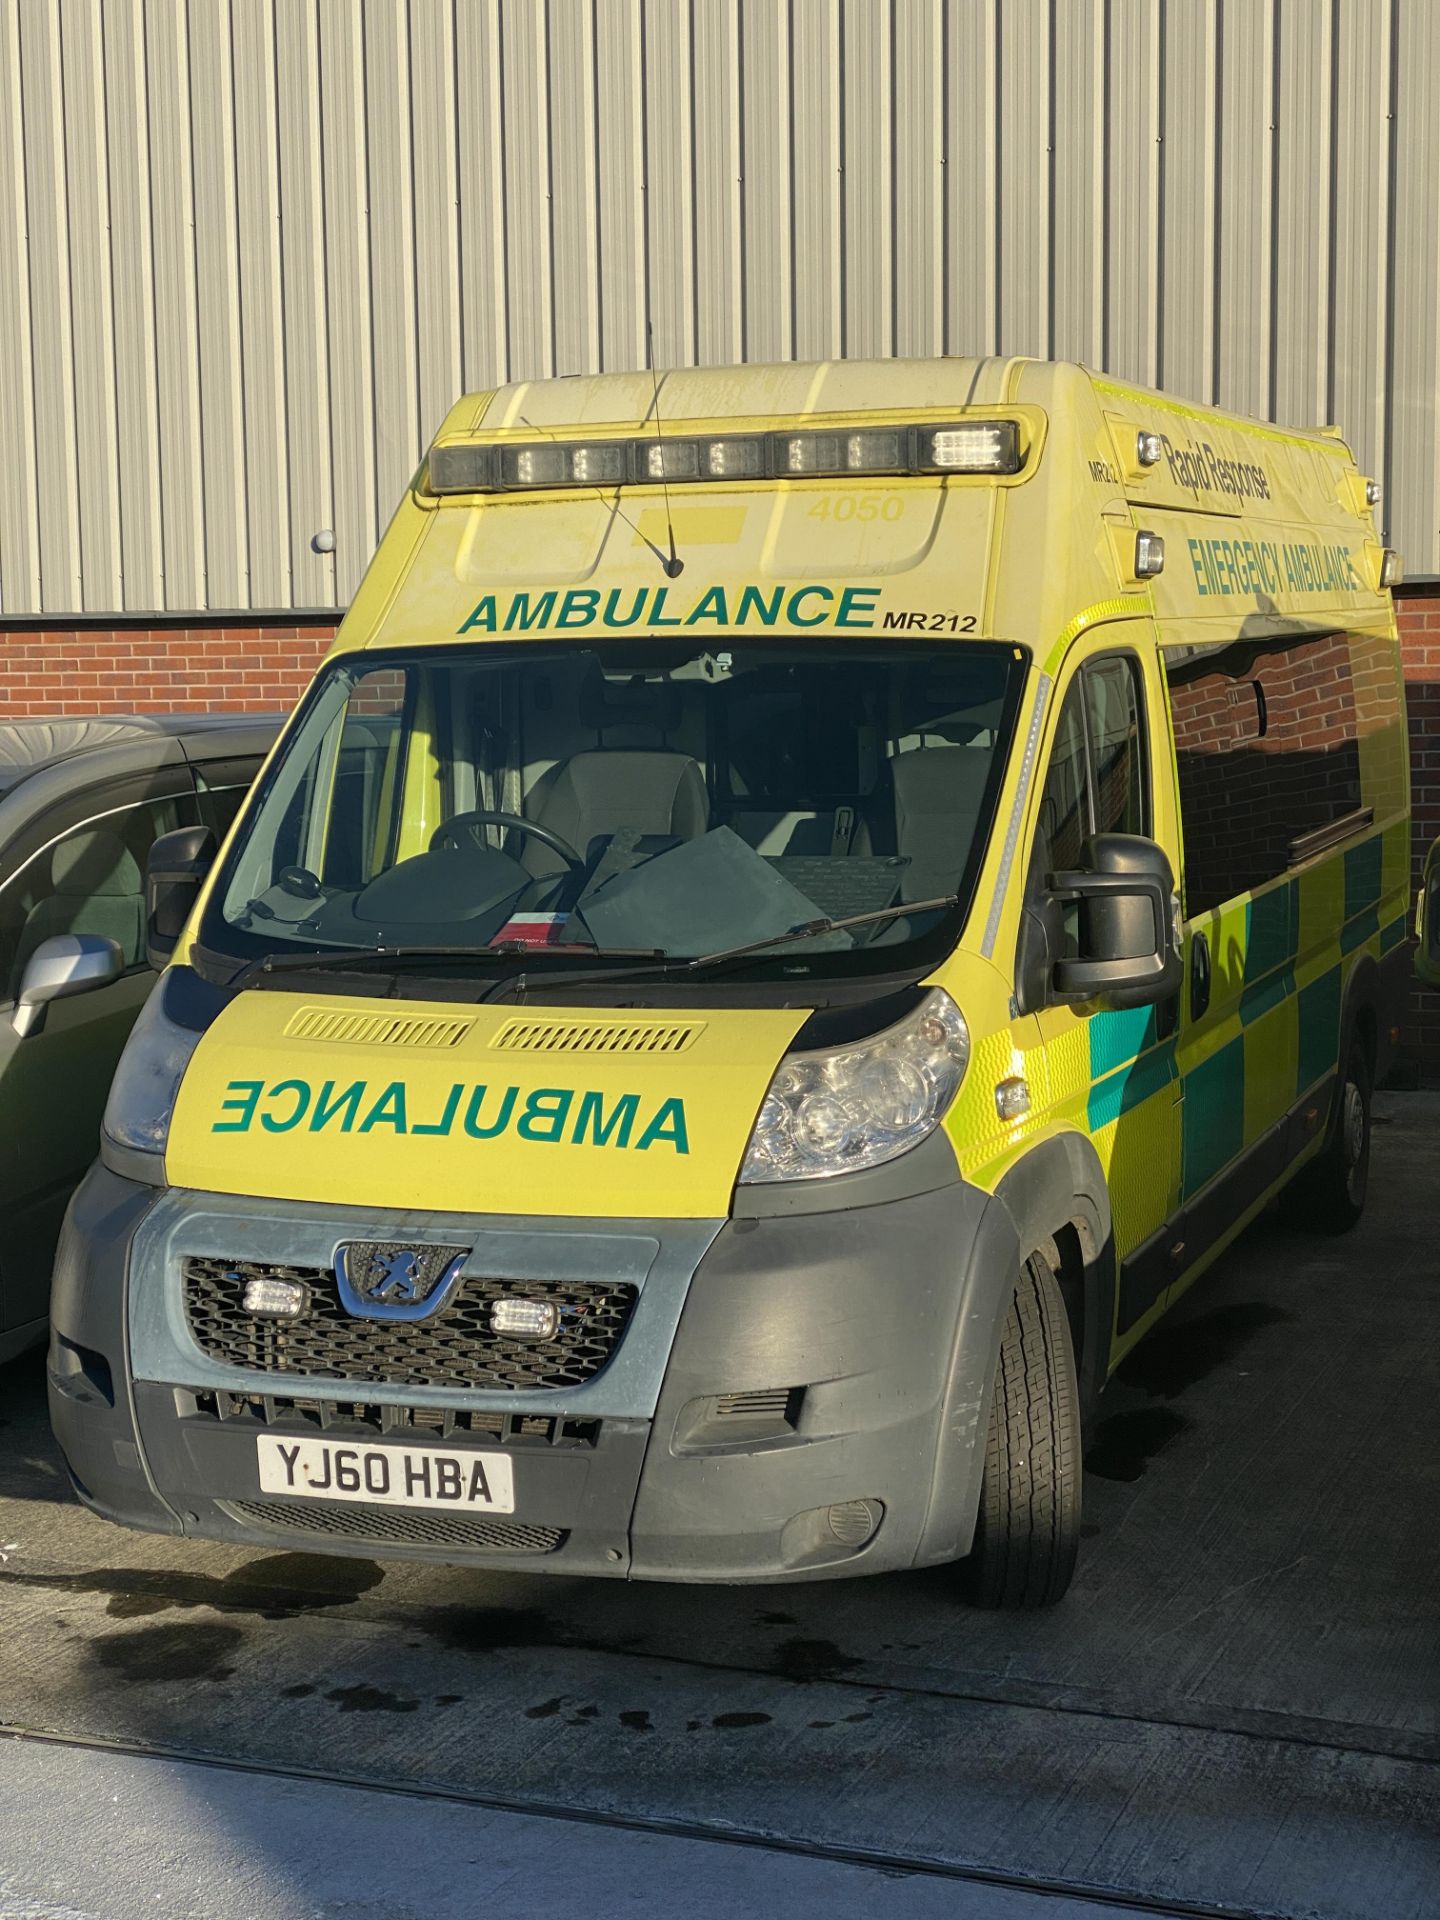 PEUGEOT BOXER 440 L4H3 HDI VAN LIVERIED UP AS AN AMBULANCE - Diesel - Yellow. - Image 10 of 26